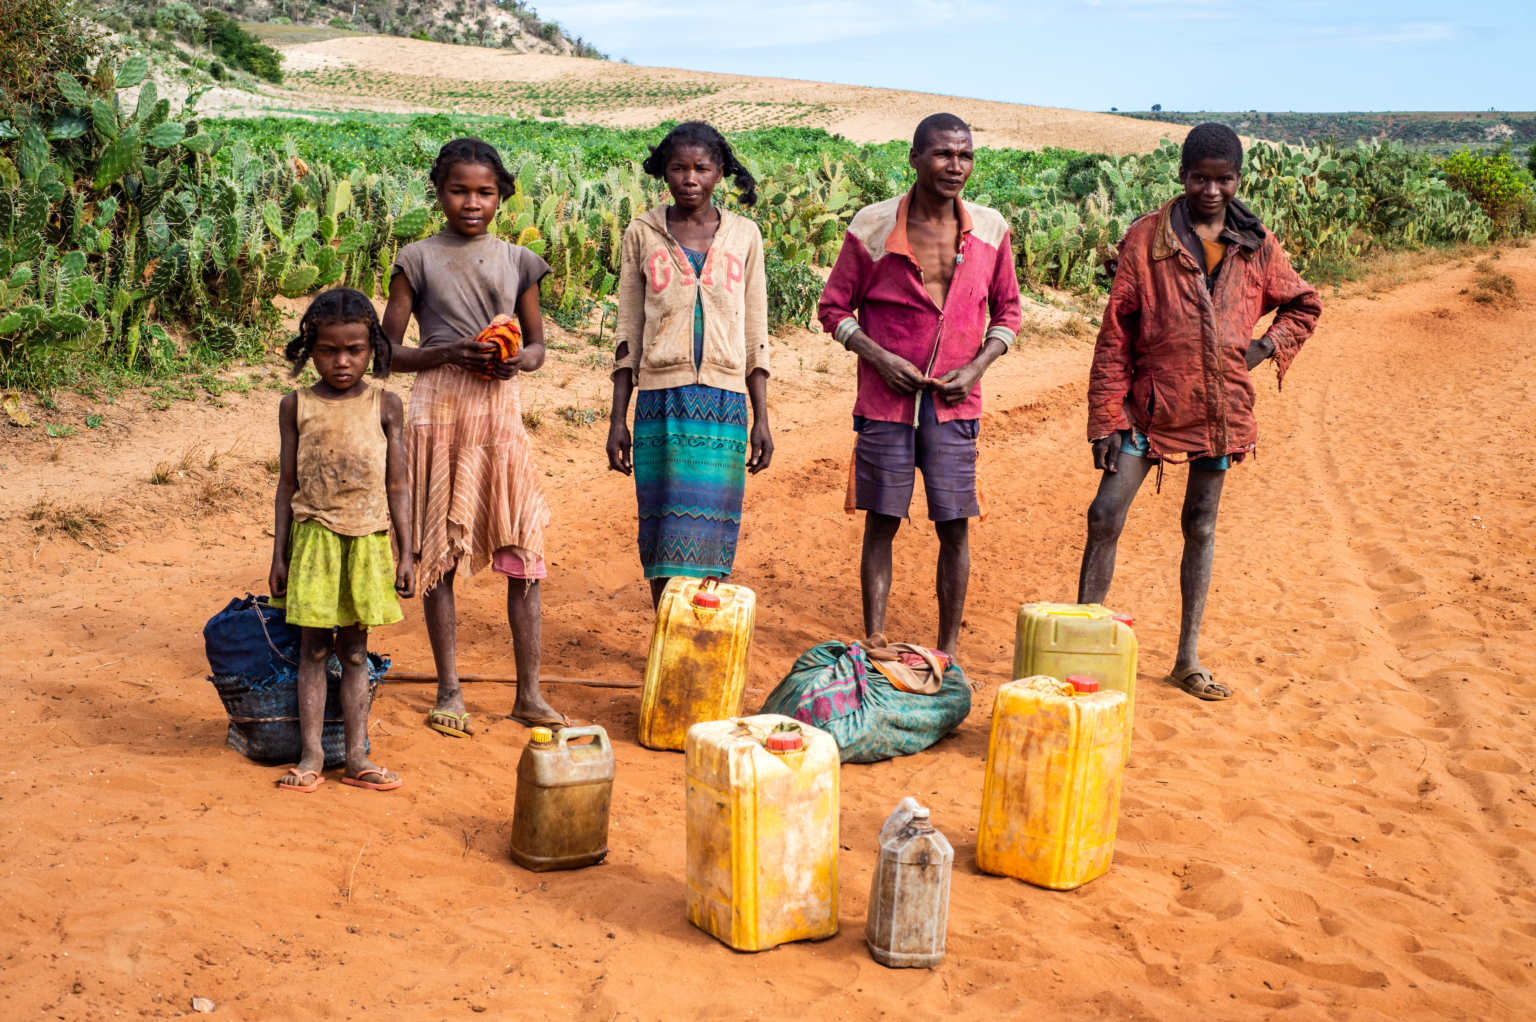 Water scarcity in the south remains a challenge in the area. A family, standing behind containers, had to walk miles to get water. © CBM/Viviane Rakotoarivony